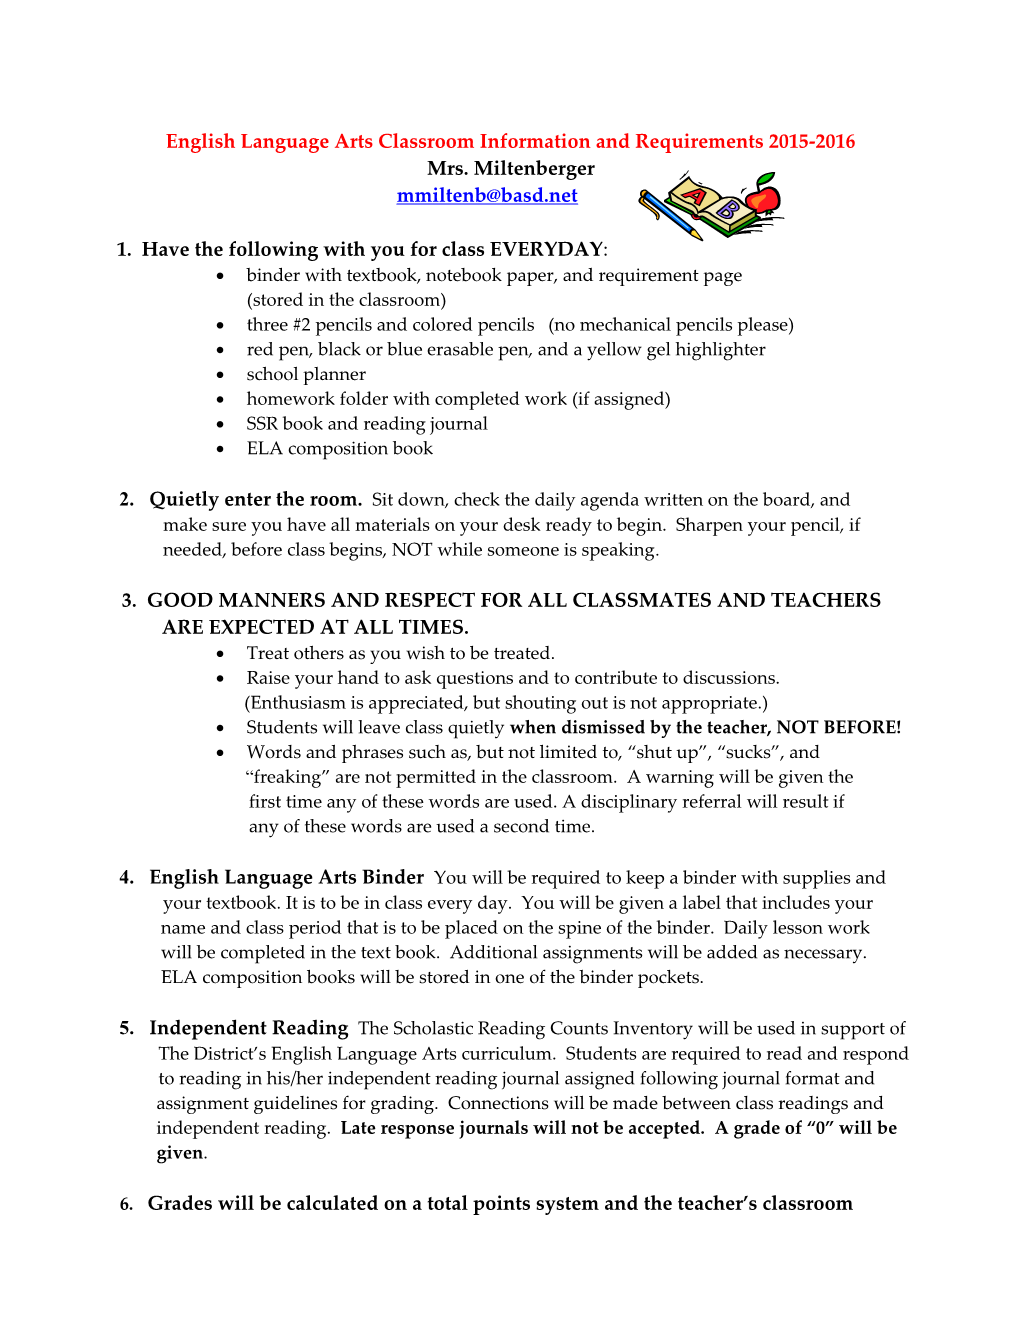 English Language Arts Classroom Information and Requirements 2015-2016